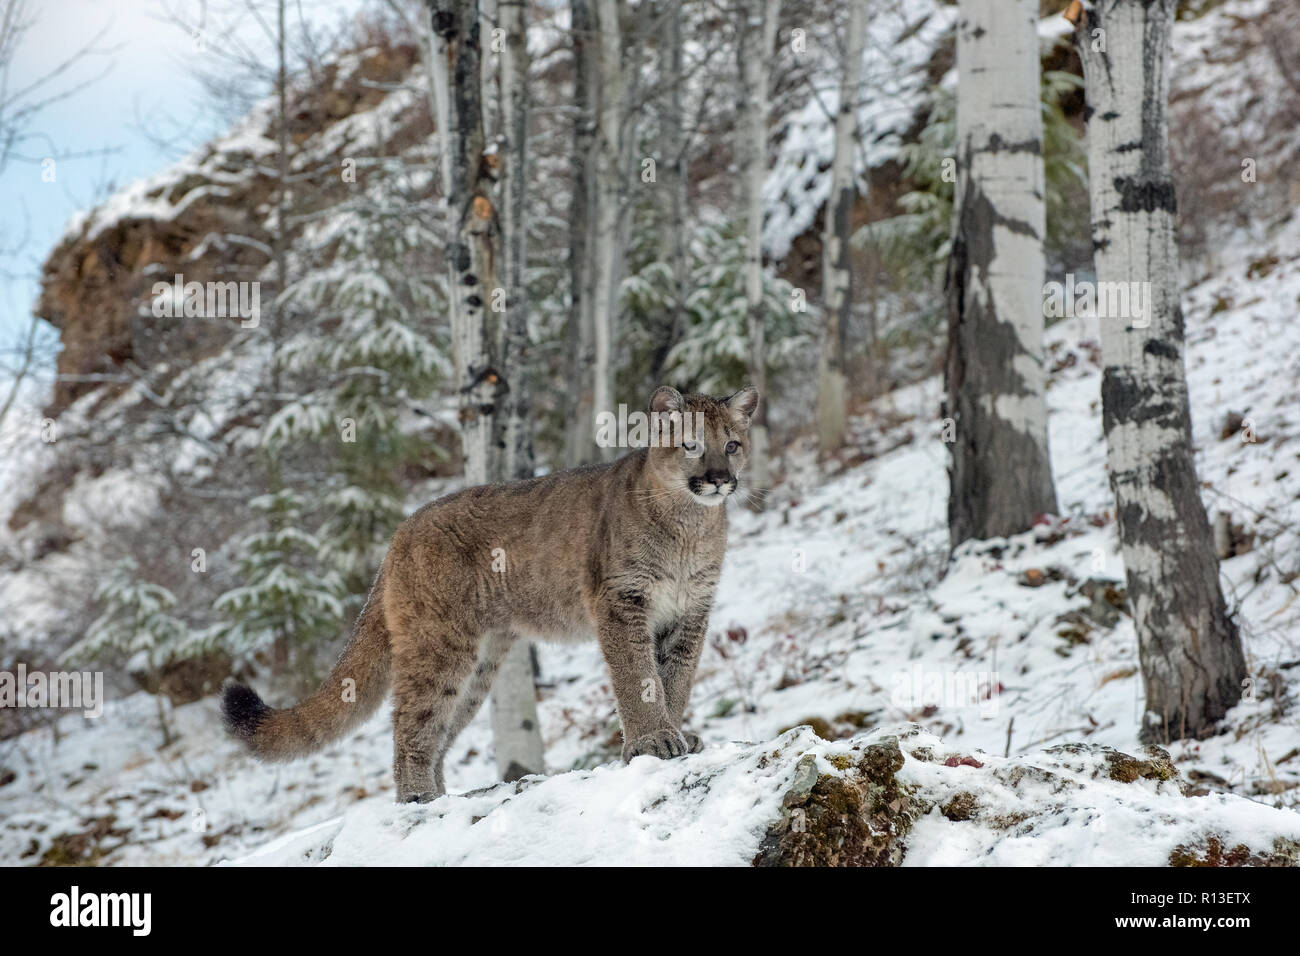 Mountain Lion Cub among Birch Trees in Winter 1 Stock Photo